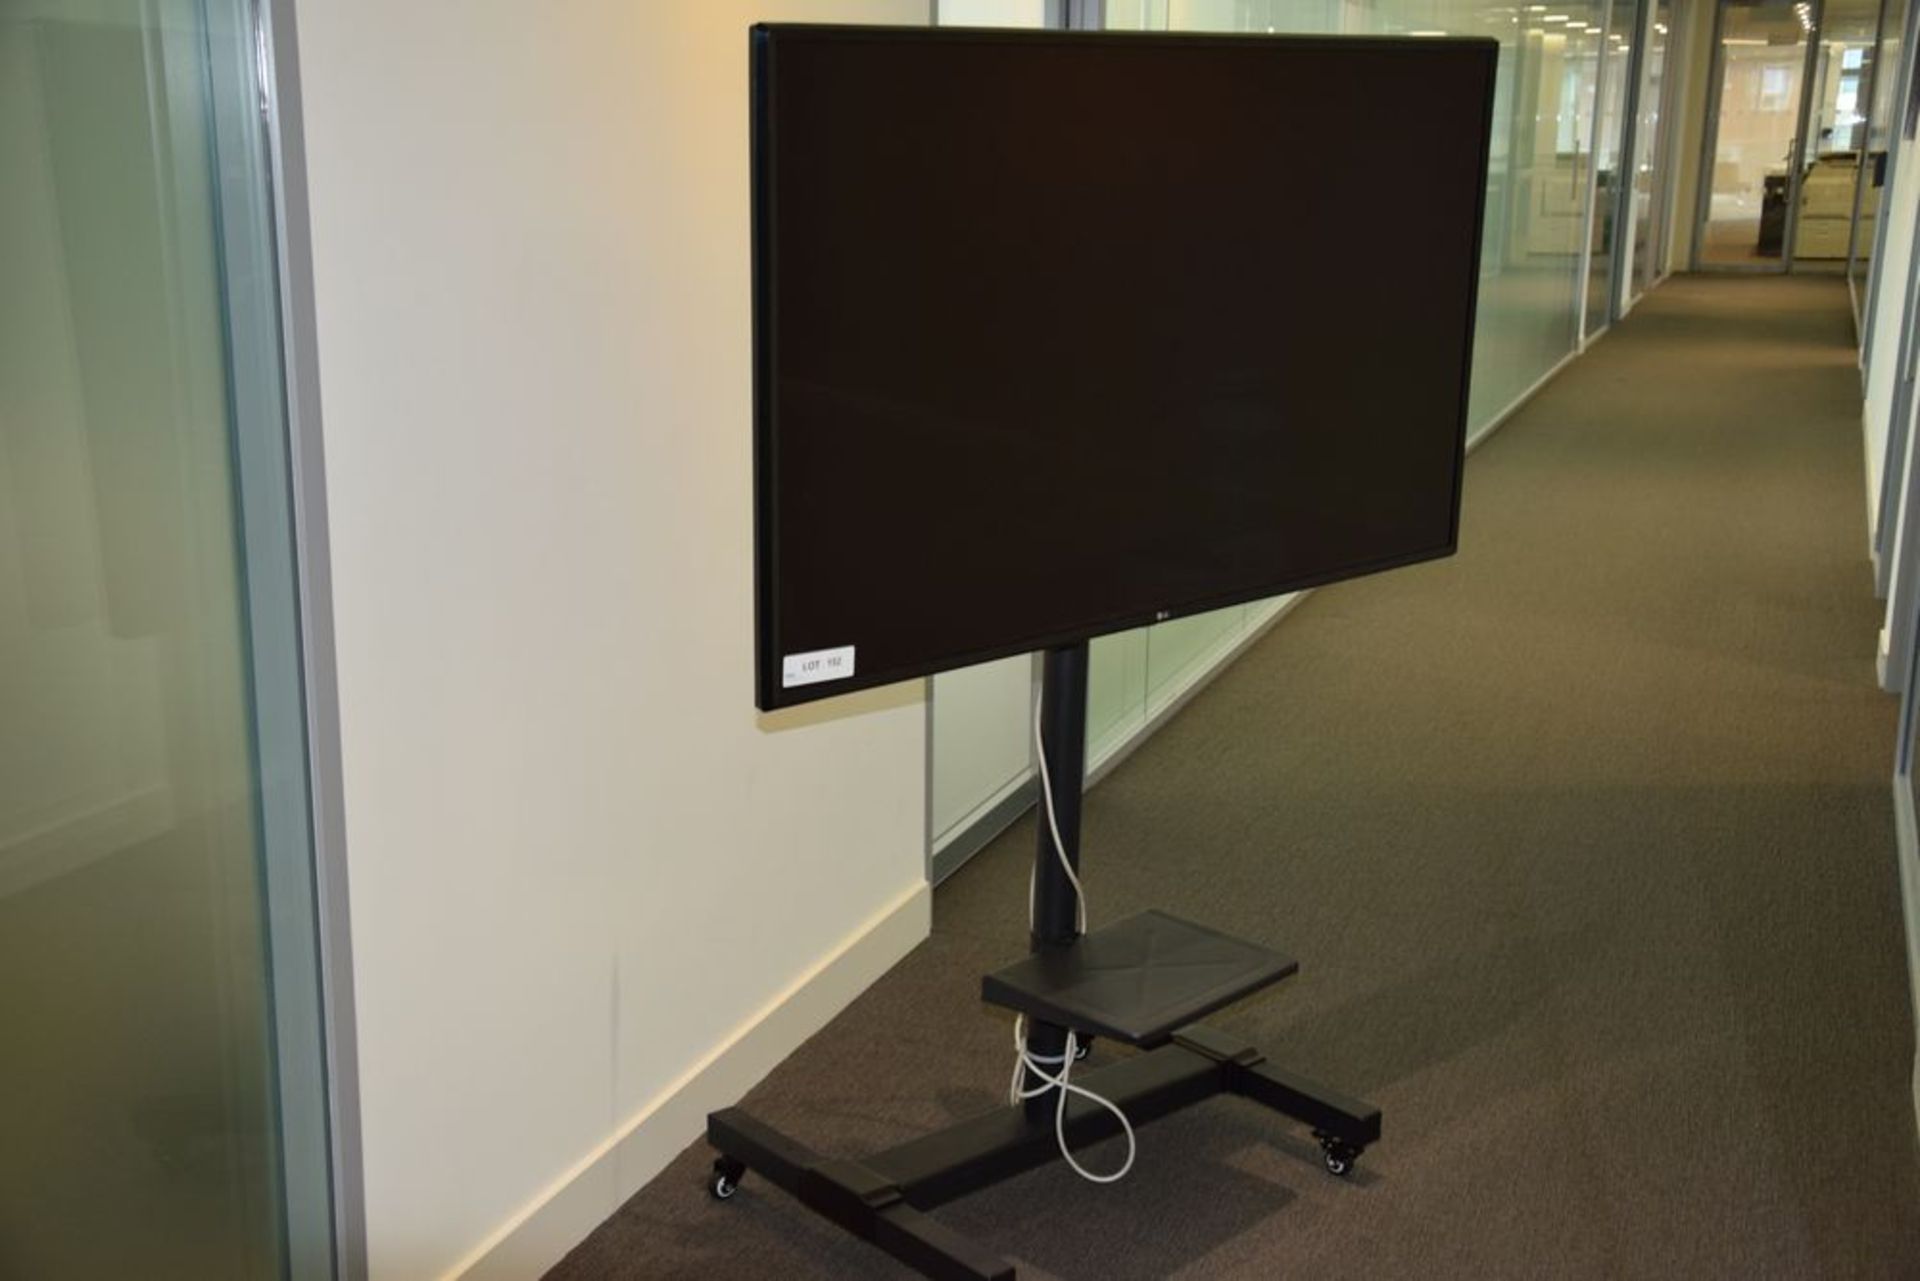 LG 55UJ635V 55 inch Flat Screen Display with Mobile Stand